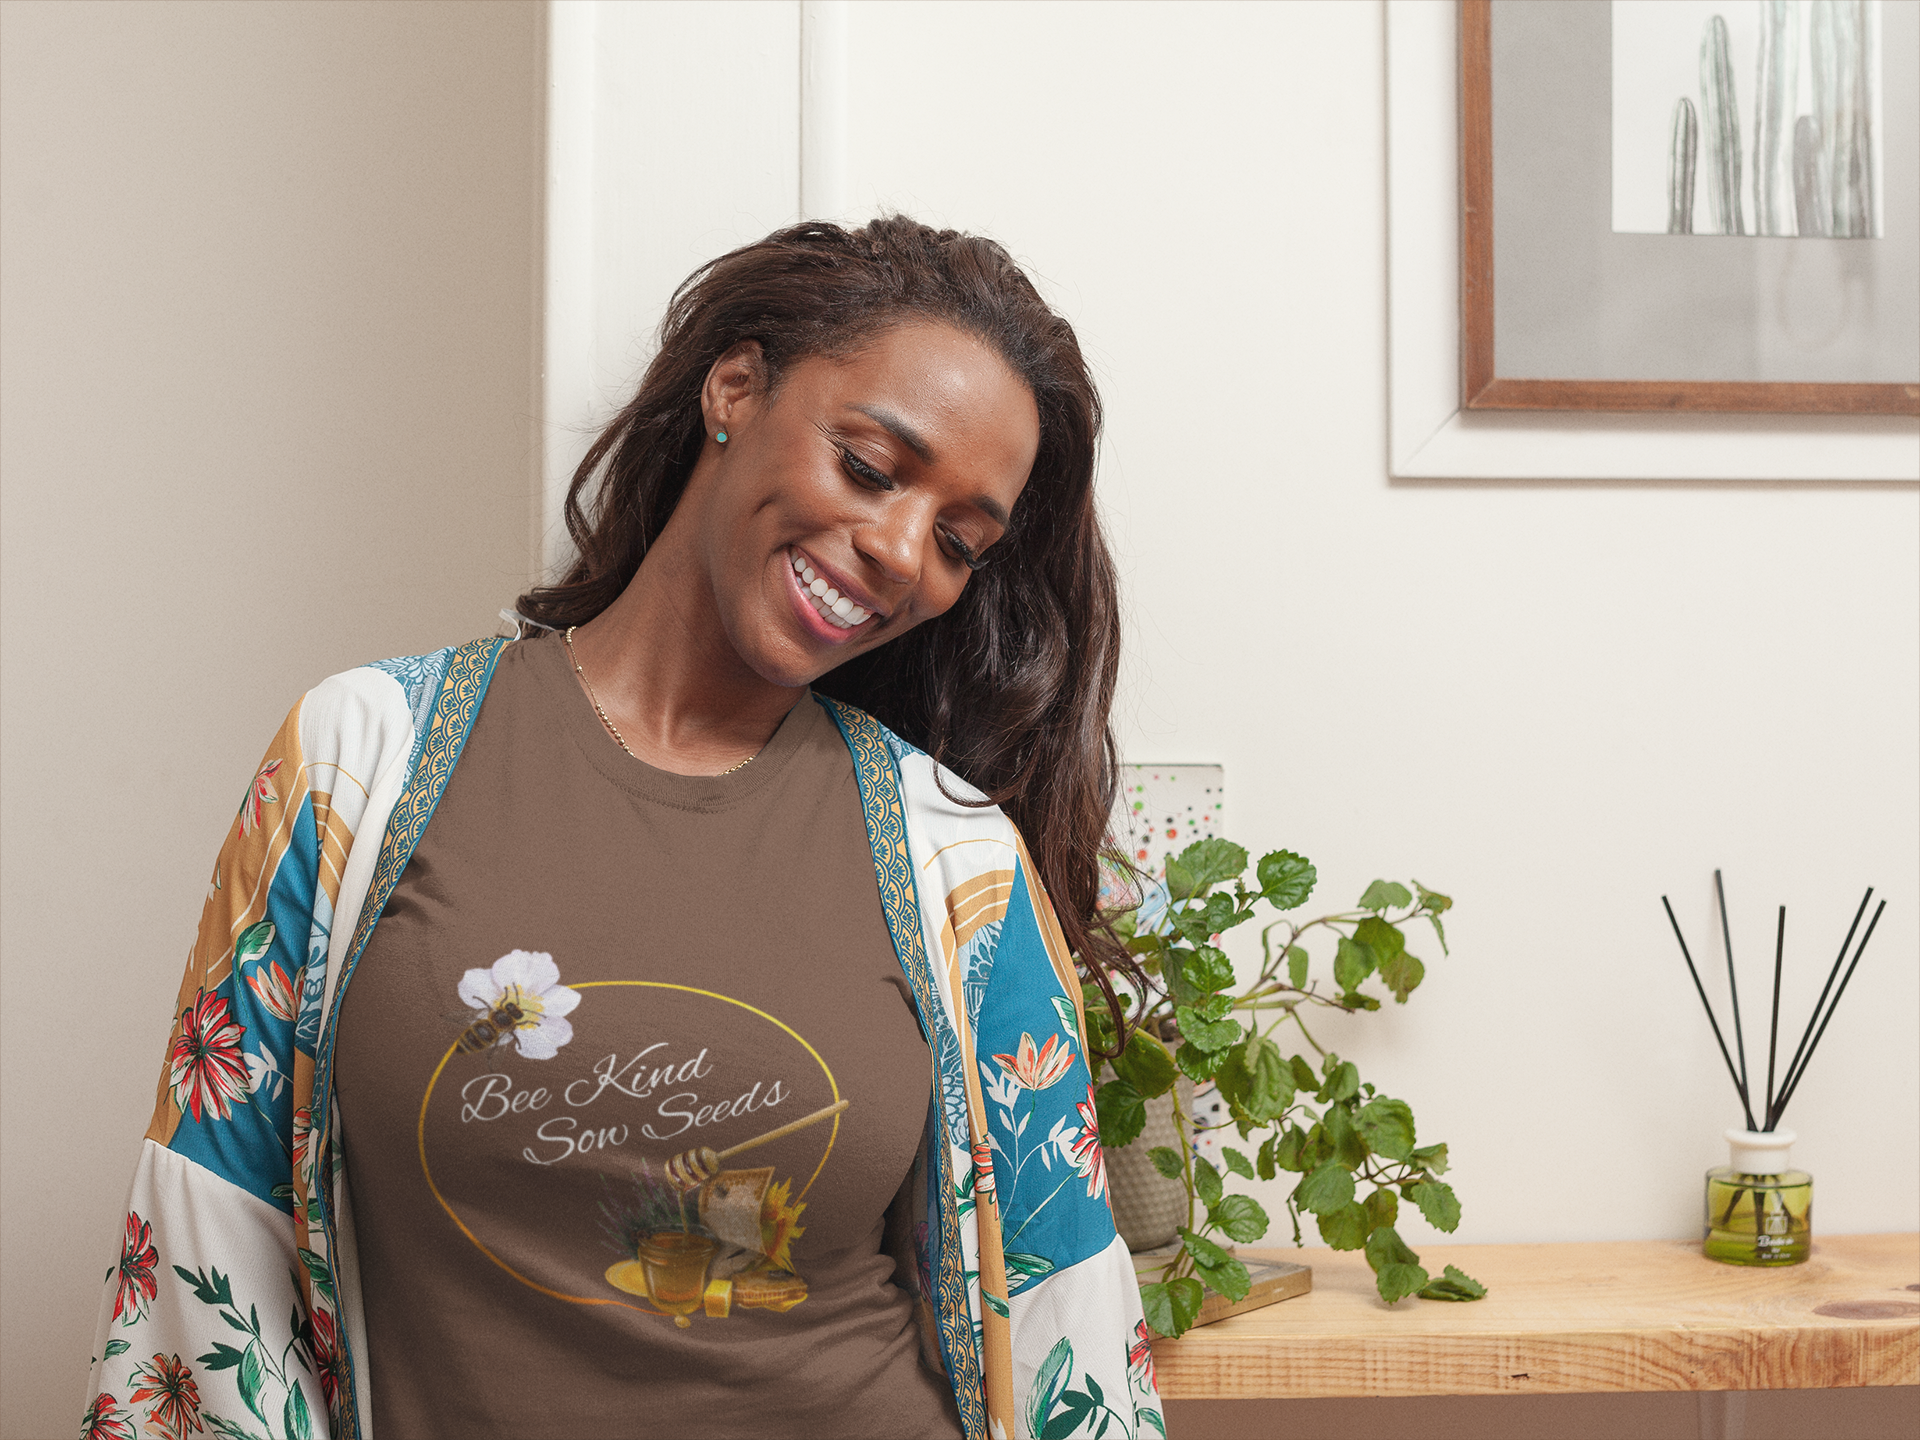 Smiling woman wearing a Bee Kind Sow Seeds in white text on brown shirt with honey, a bee, and a golden circle.